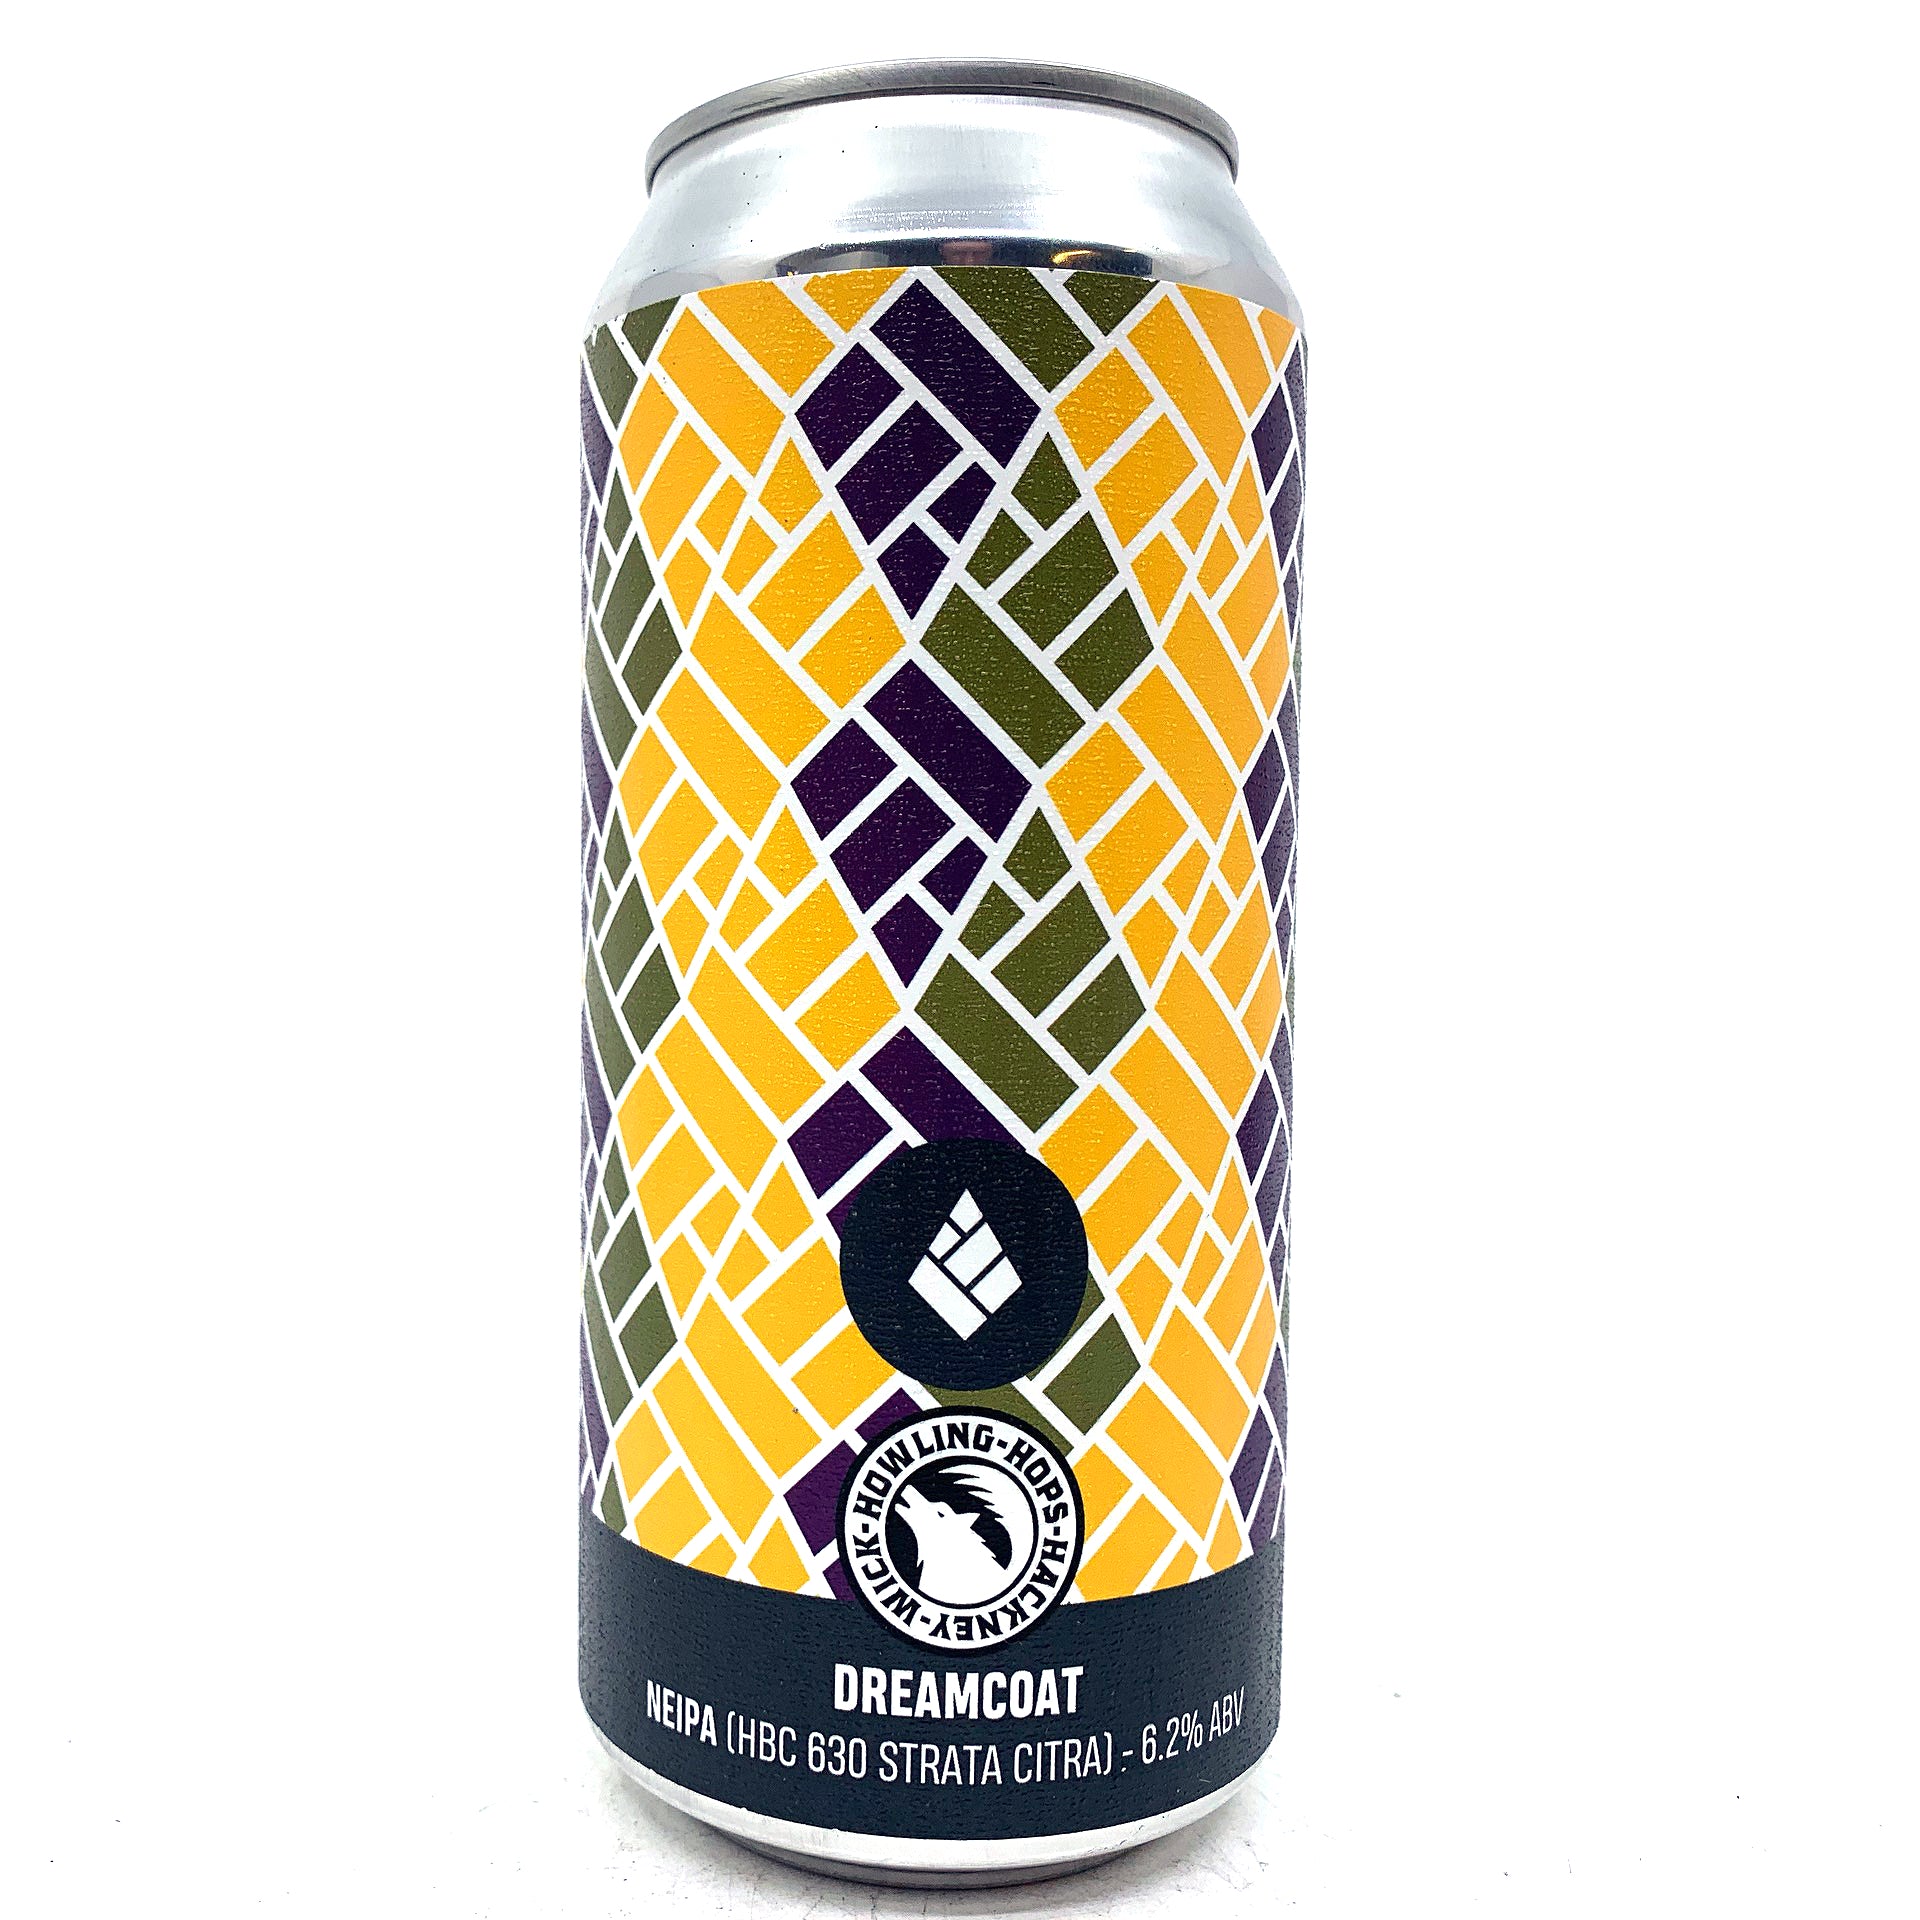 Howling Hops x Drop Project Dreamcoat New England IPA 6.2% (440ml can)-Hop Burns & Black